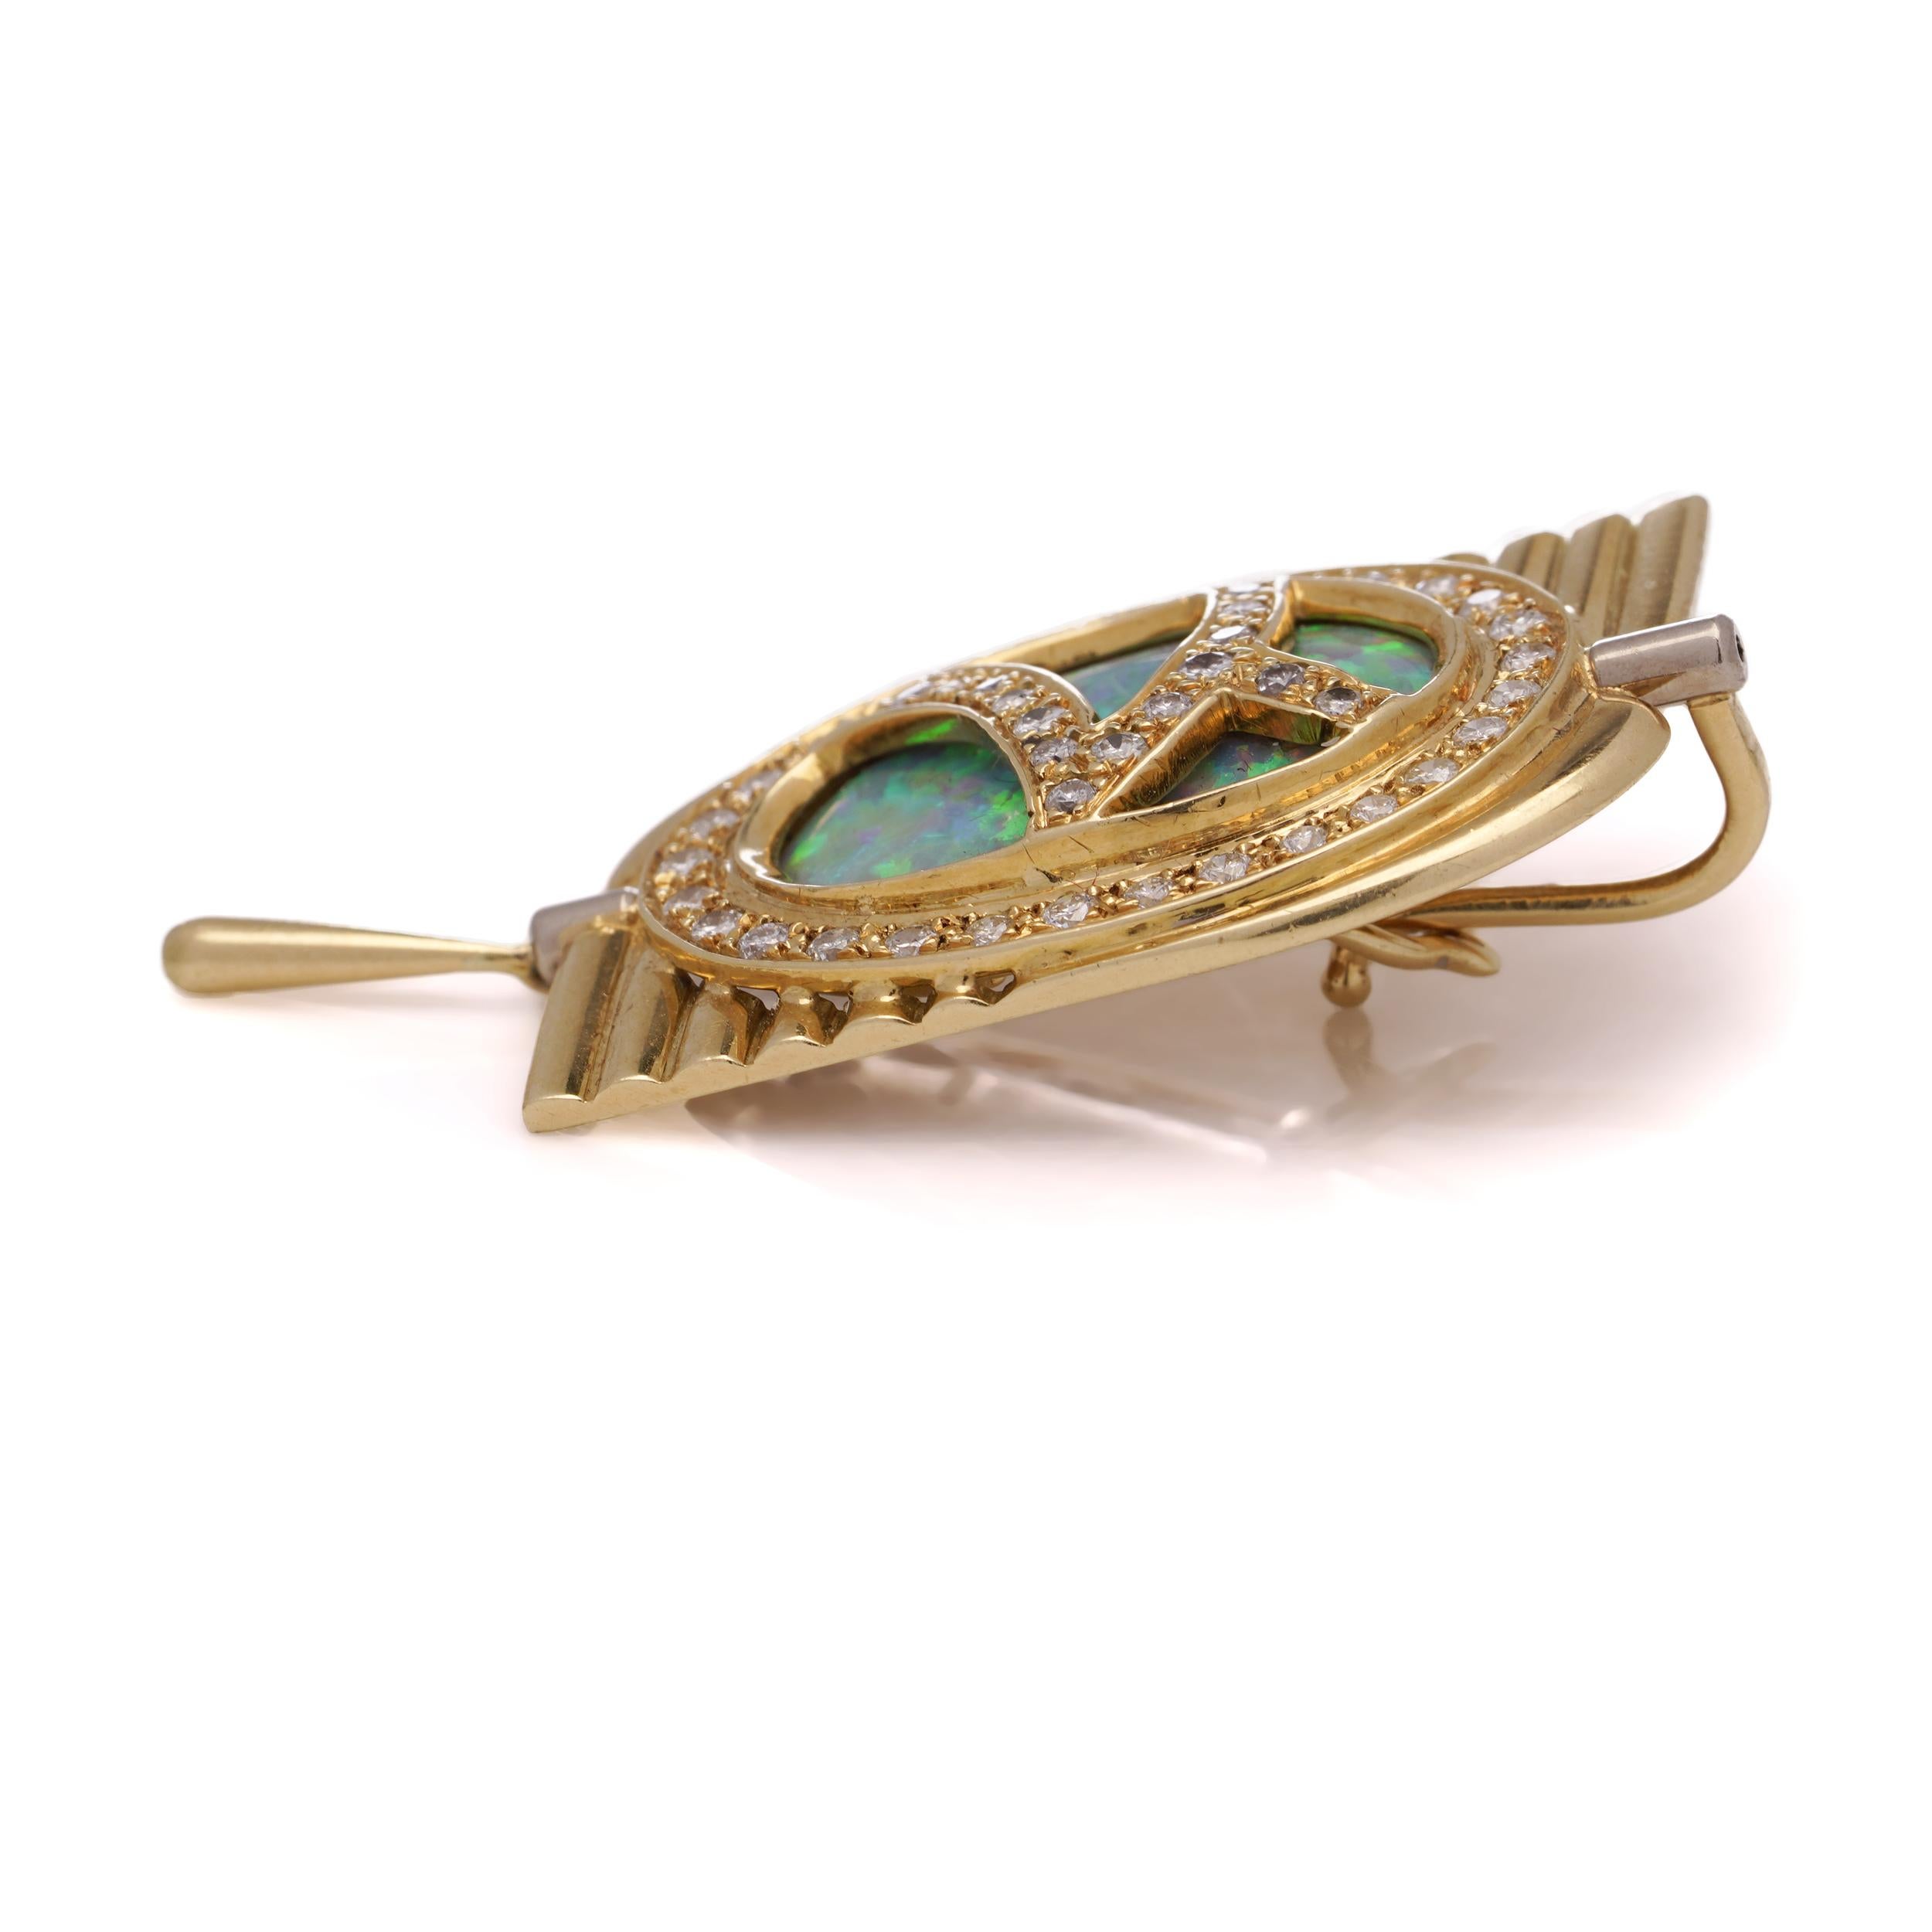 Geoffrey Turk Vintage 18kt. yellow gold pendant with opal and diamonds.
Made in the United Kingdom, London, 1984
Maker: Geoffrey Turk 
Fully hallmarked

Dimensions:
Length x width x height: 4 x 1.8 x 1 cm
Weight: 8.74 grams

Oval -
Approx carat